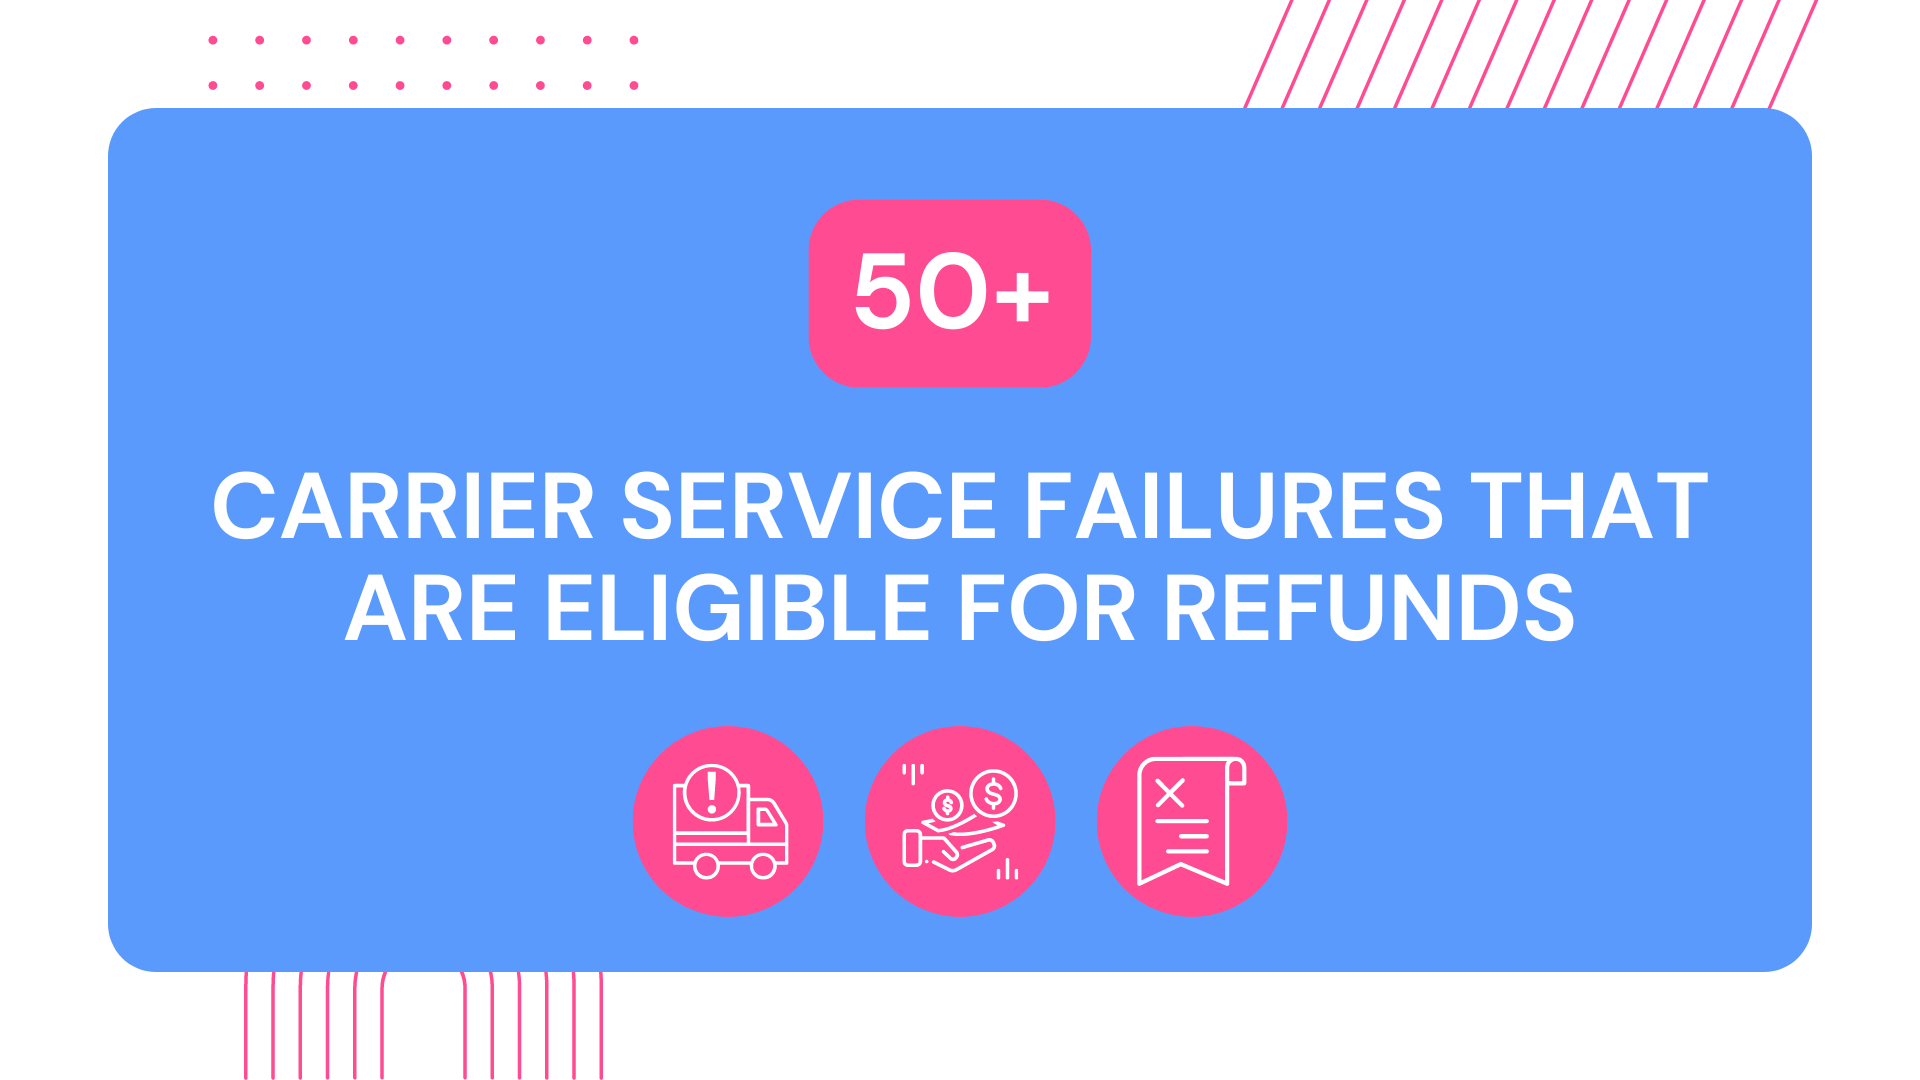 50+ service failures and billing errors